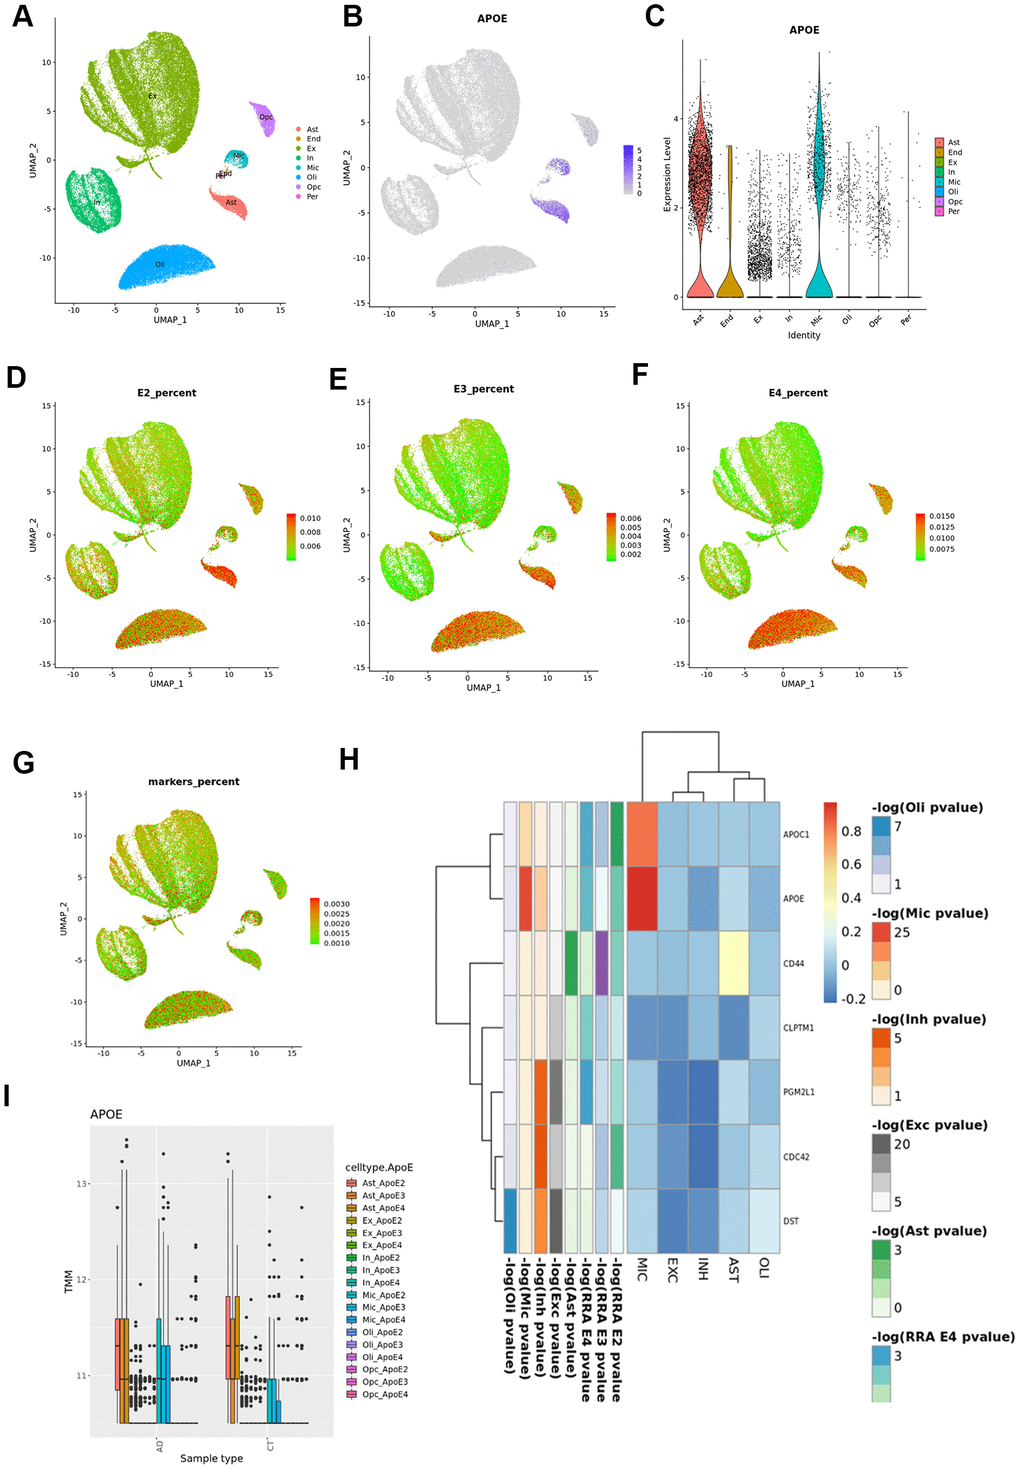 Cortex snRNAseq data from the ROSMAP study. (A) Cell clustering labelled by reported cell type; (B) APOE expression across cell types; (C) violin plot for APOE expression by cell type; (D) UMAP plot for average expression of cortex RRA APOE2 candidates by total gene expression; (E) UMAP plot for average expression of cortex RRA APOE3 candidates by total gene expression; (F) UMAP plot for average expression of cortex RRA APOE4 candidates by total gene expression; (G) UMAP plot for average expression of blood/cortex biomarkers by total gene expression; (H) expression by cell type of the seven genes in common in all the RRA analyses; (I) APOE expression by cell type and case status.